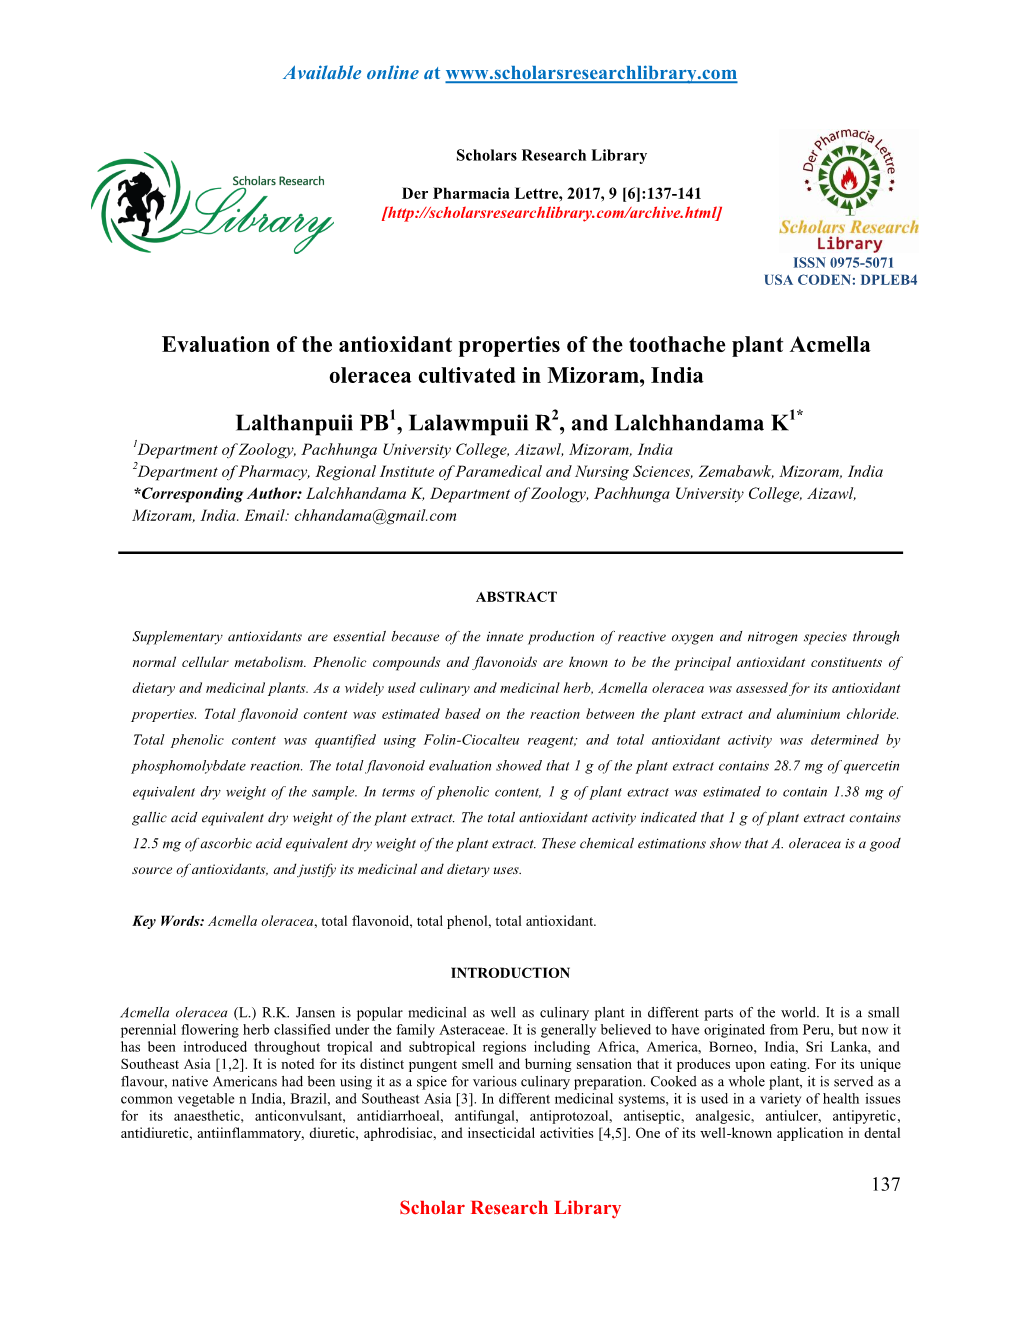 Evaluation of the Antioxidant Properties of the Toothache Plant Acmella Oleracea Cultivated in Mizoram, India Lalthanpuii PB